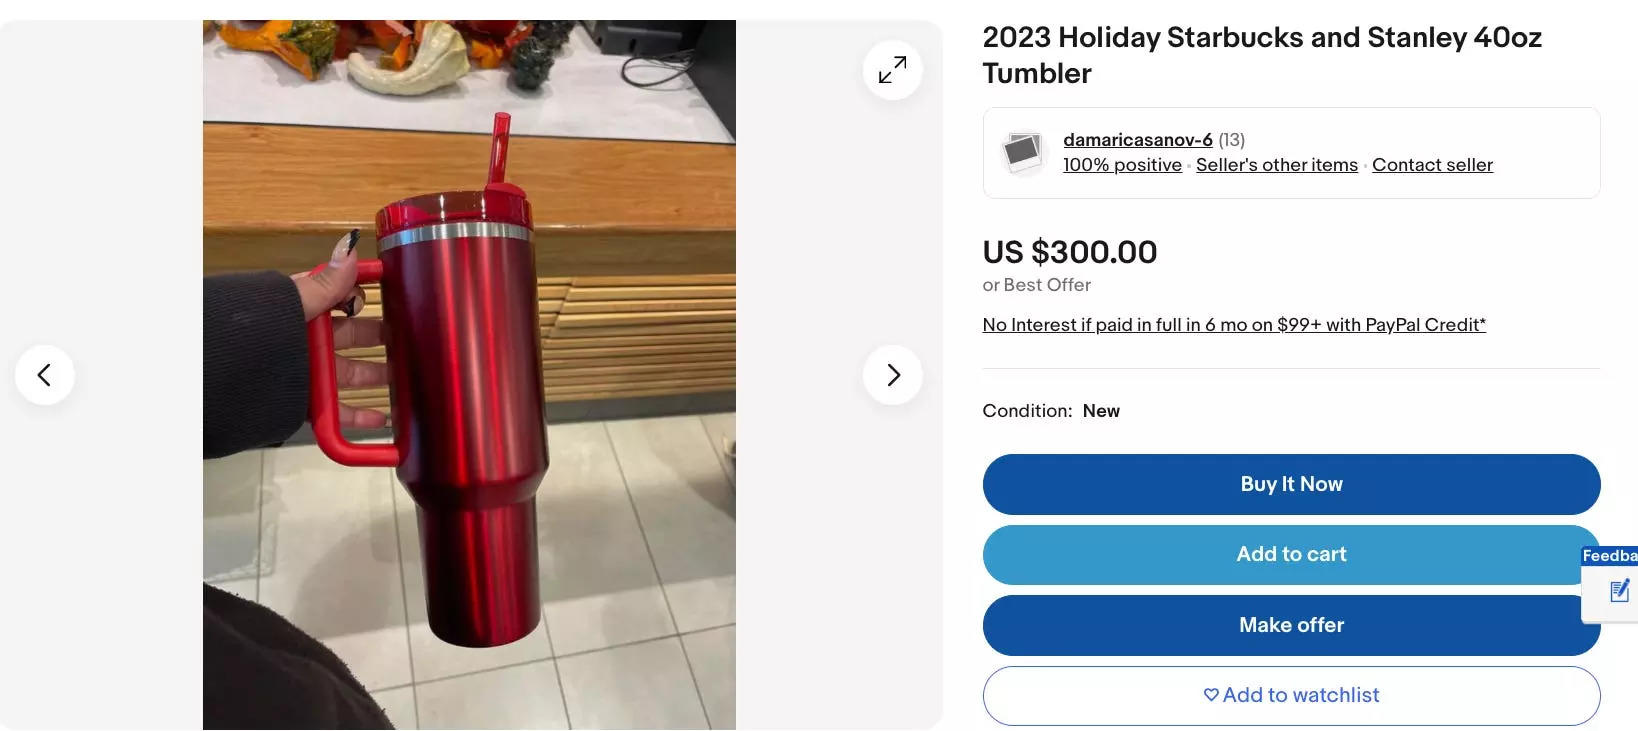 https://www.businessinsider.in/photo/104952394/starbucks-customers-are-snapping-up-50-stanley-red-holiday-tumblers-and-reselling-them-for-as-much-300.jpg?imgsize=46862